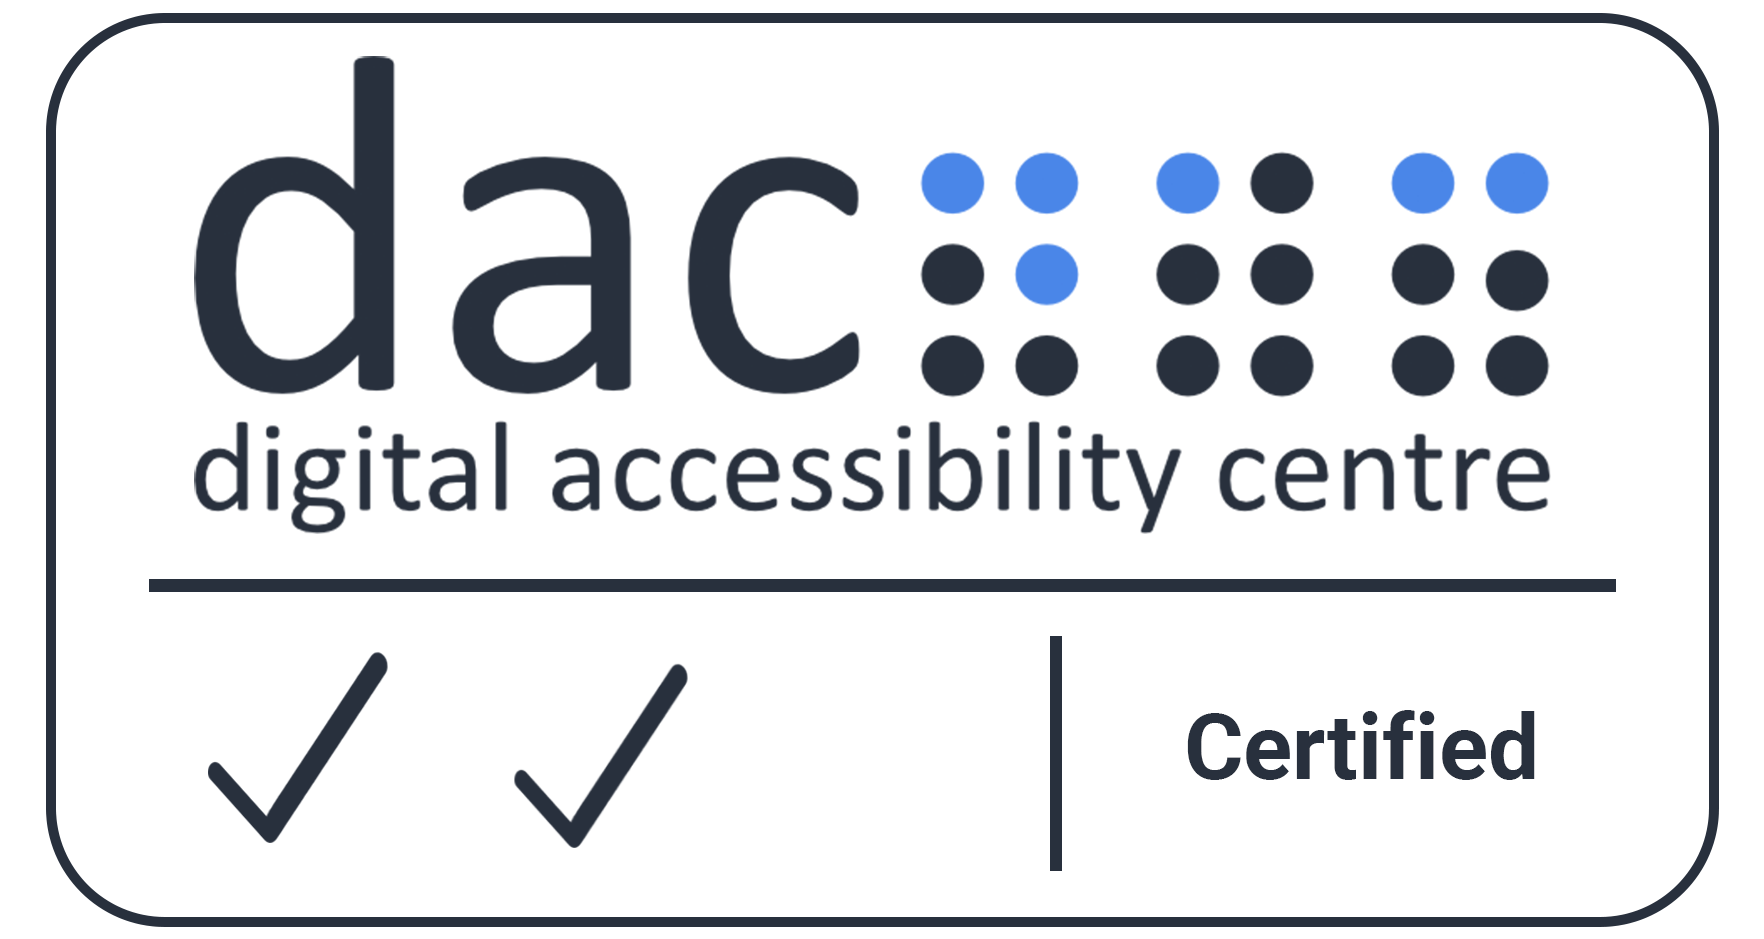 Pastdue Credit Solution - Disability Accessibility Center certificate.